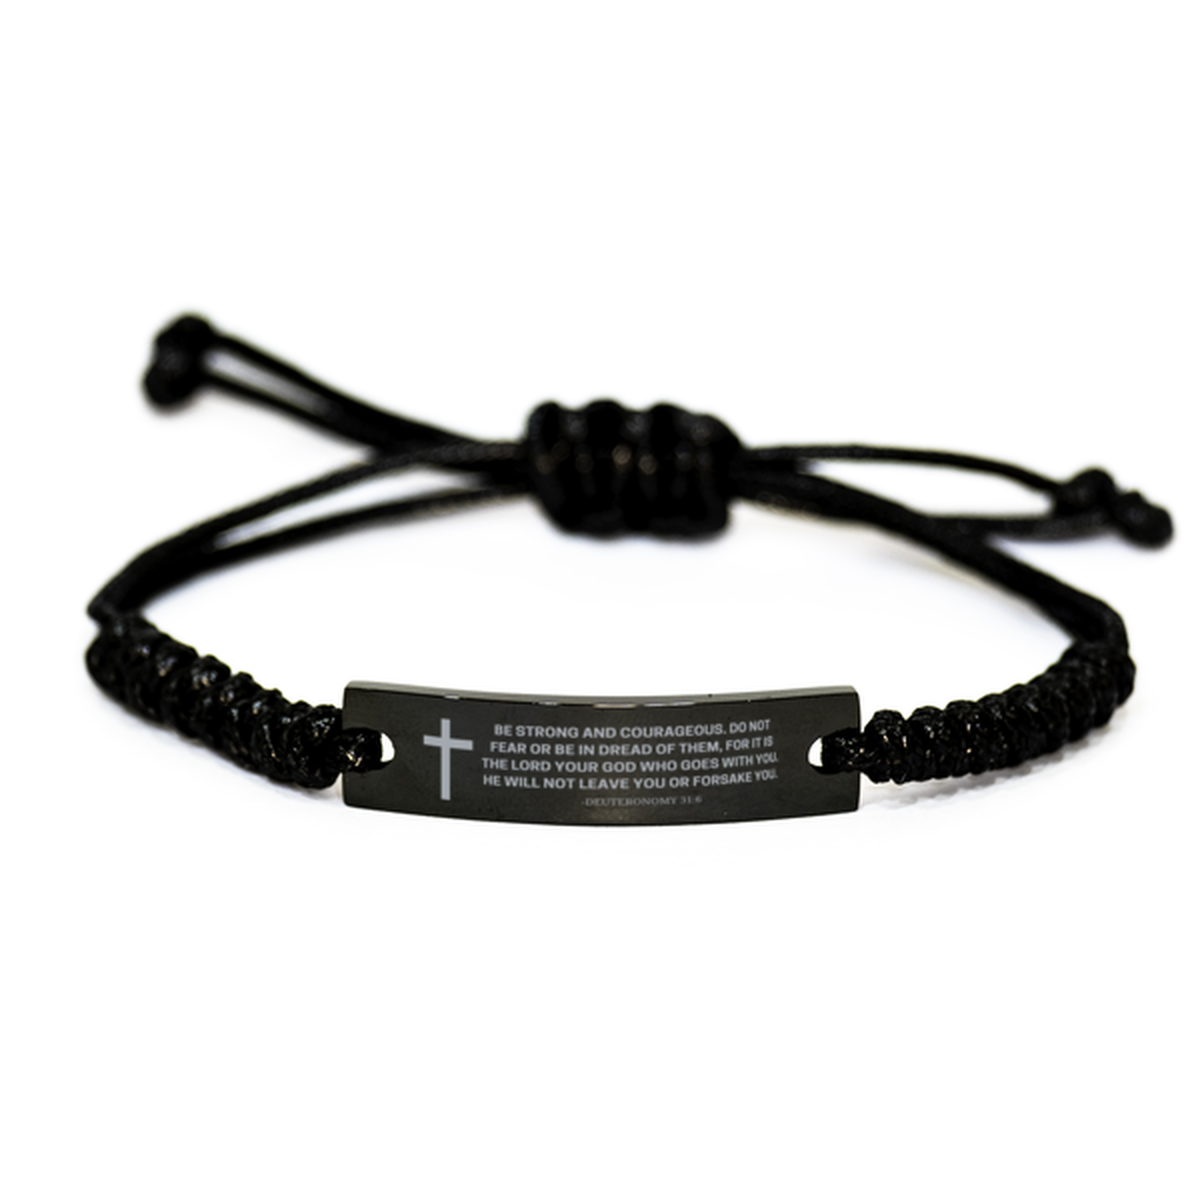 Baptism Gifts For Teenage Boys Girls, Christian Bible Verse Black Rope Bracelet, Be strong and courageous, Catholic Confirmation Gifts for Son, Godson, Grandson, Nephew